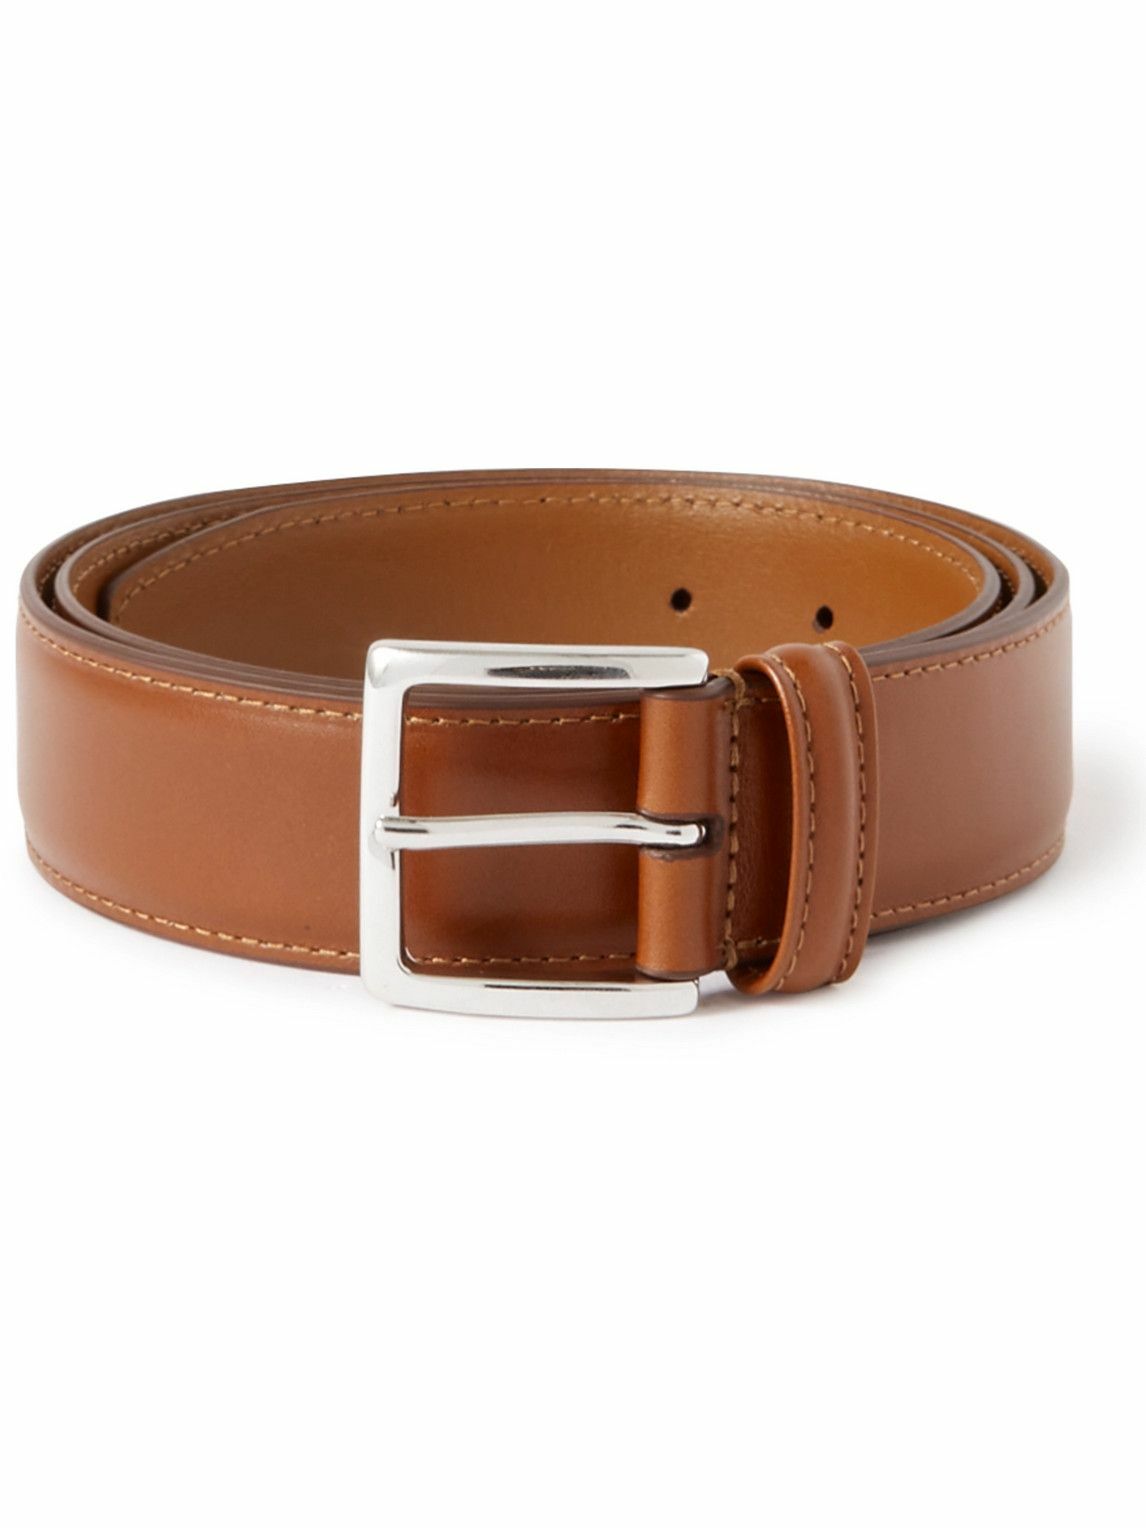 Anderson's - 3cm Leather Belt - Brown Anderson's